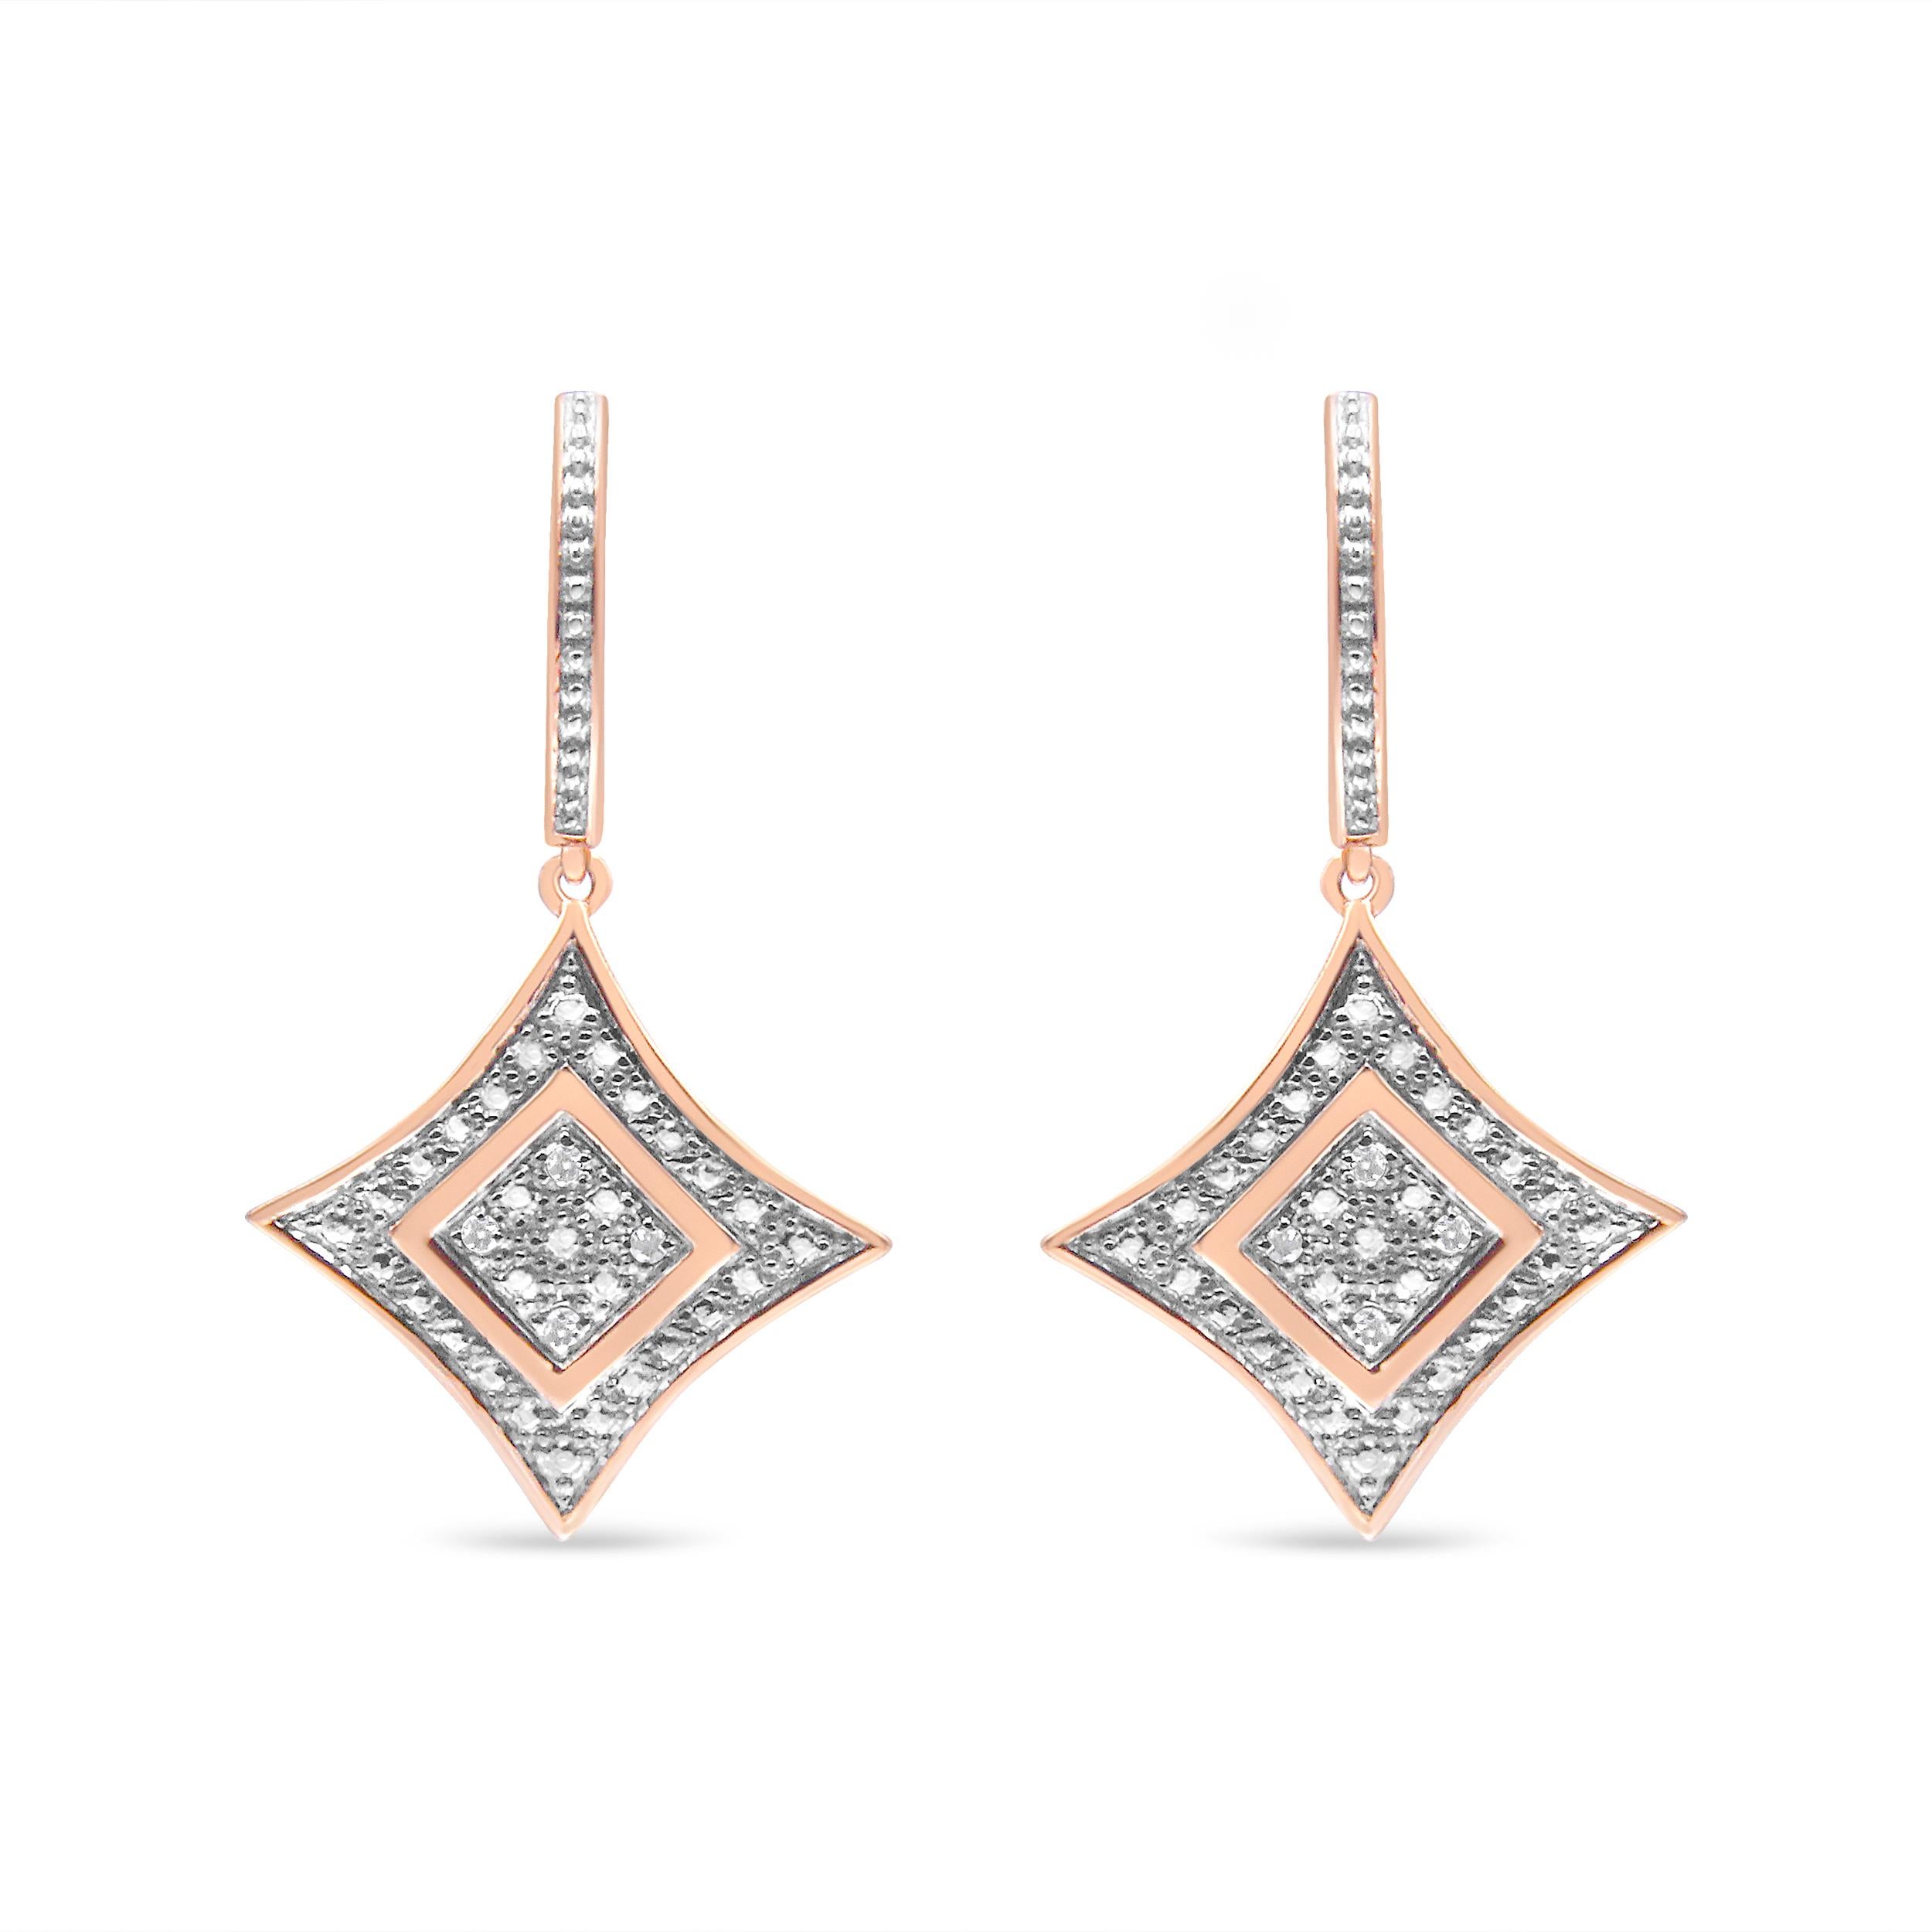 Twinkle like a star by wearing these stunning dangle earrings. Each of the earrings is made using sterling silver and plated with rose gold. Fashioned in the cushion shape, the earrings are embellished with shimmering round cut diamonds that are